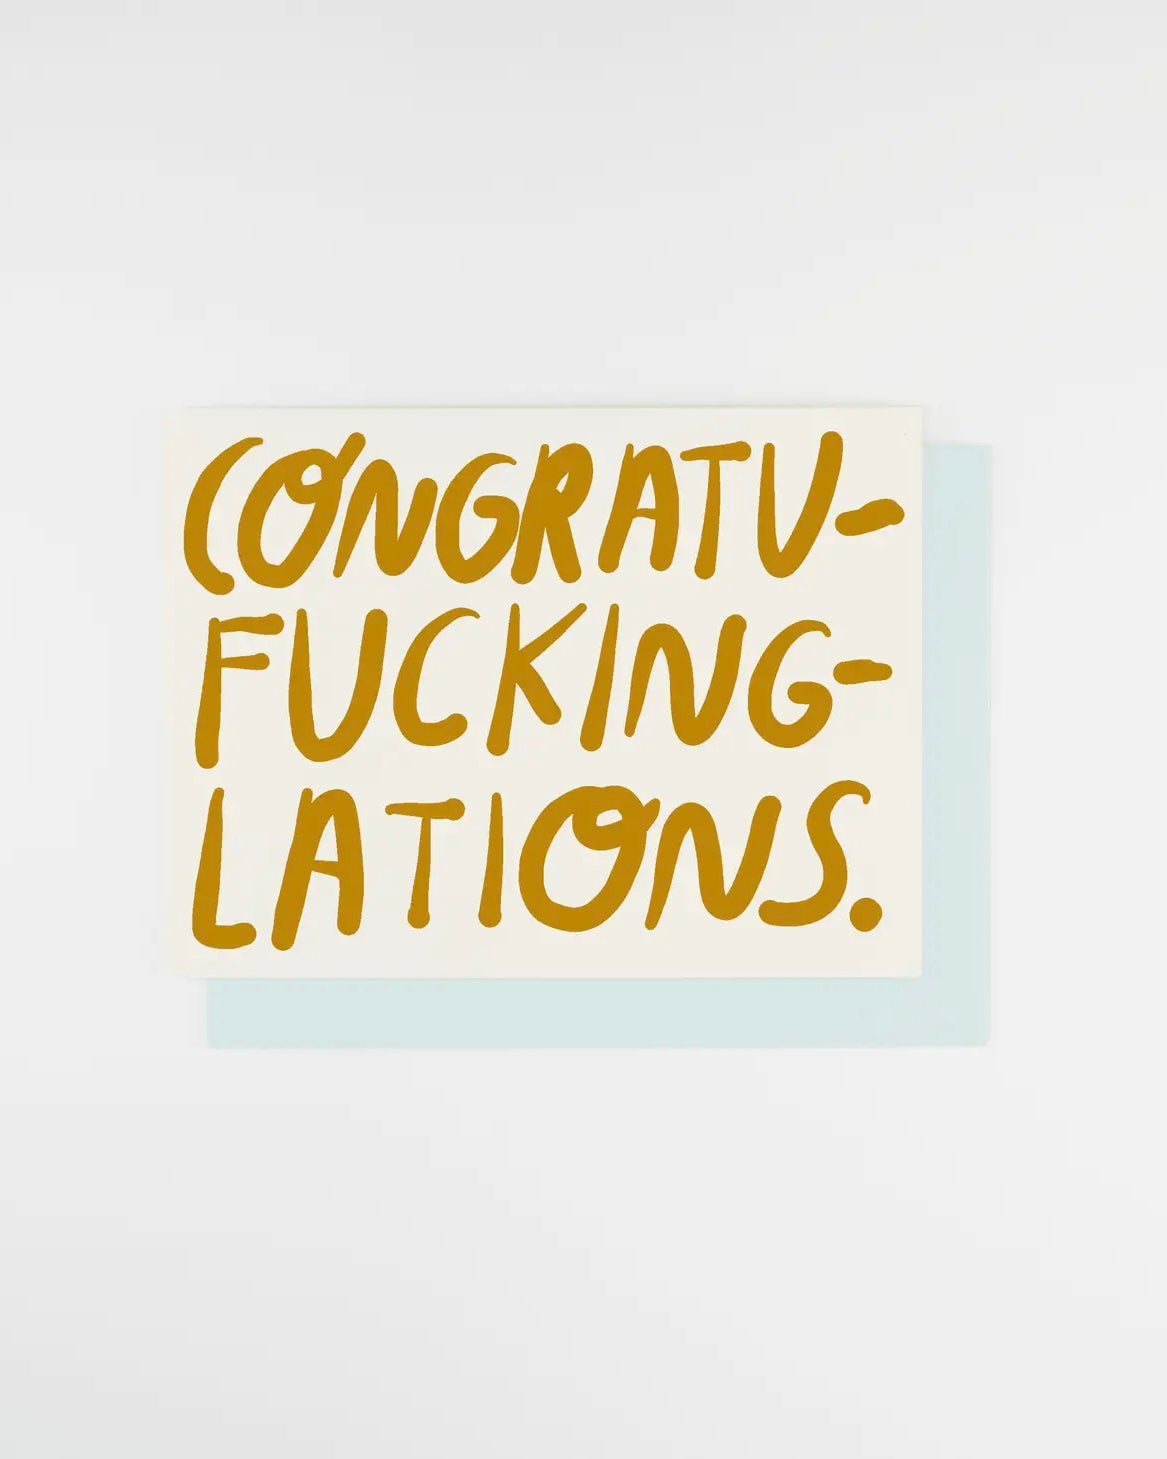 People I've Loved Congratu-f*ing-lations Card